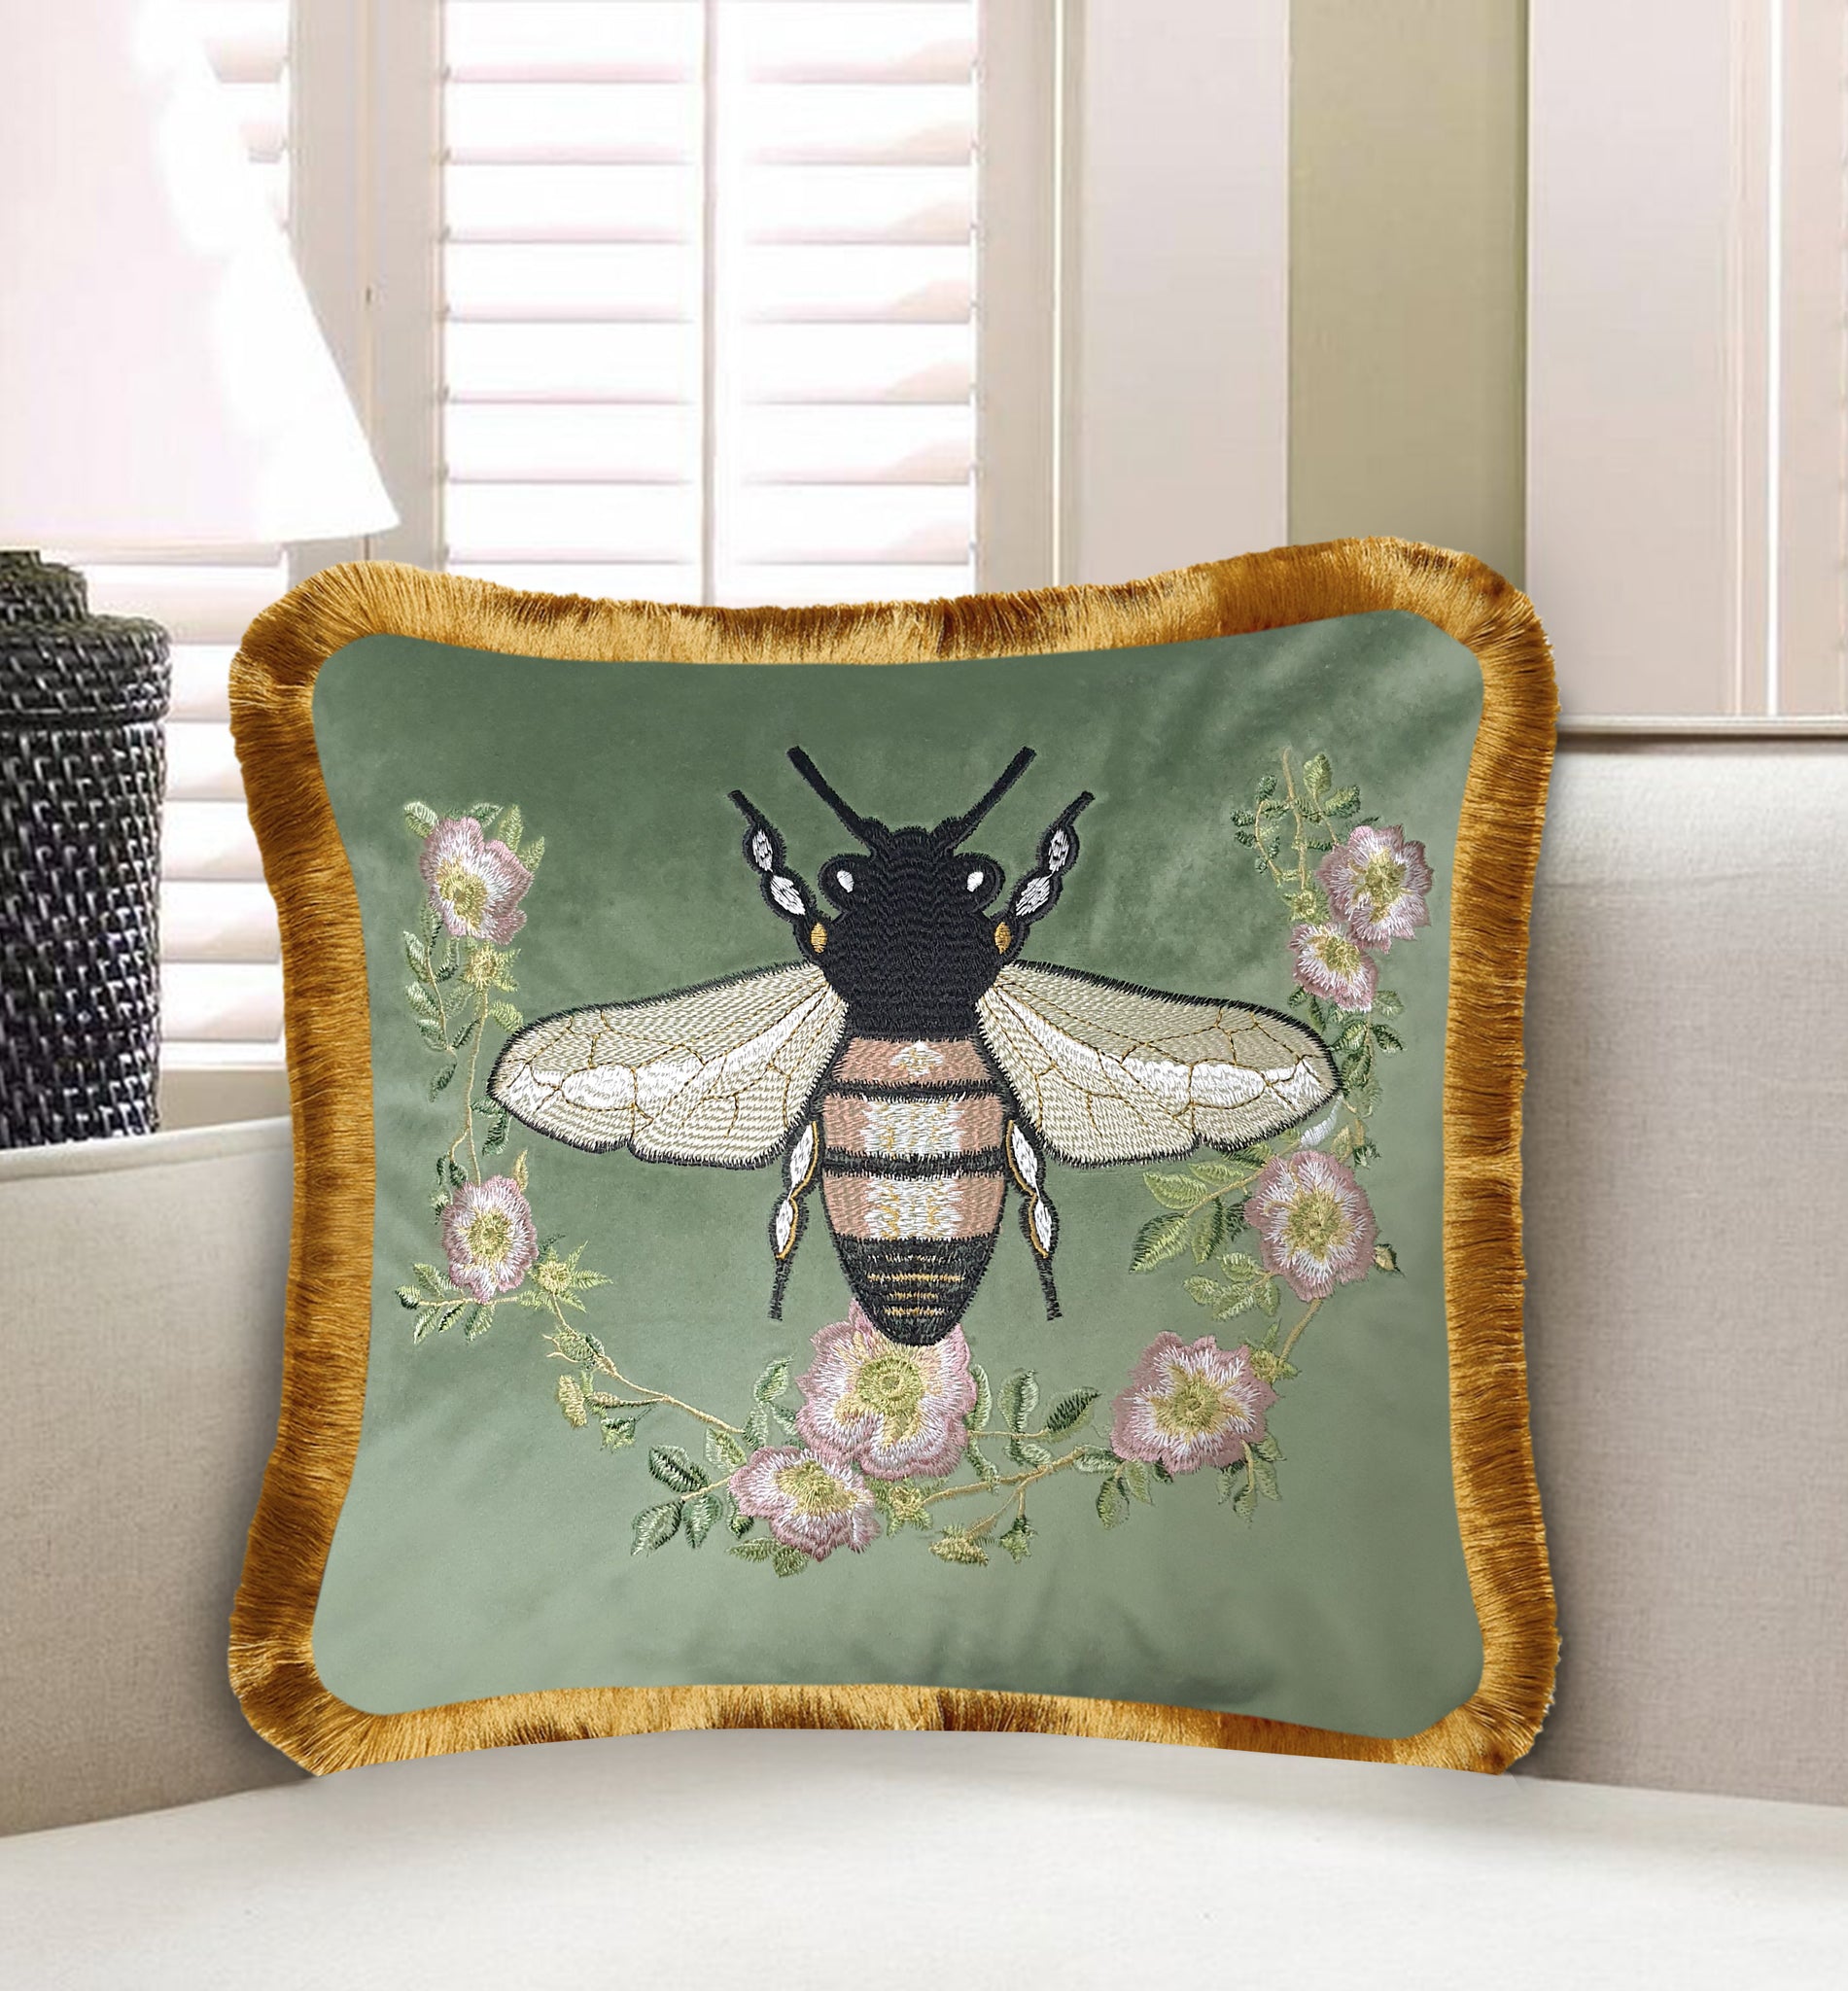 Velvet Cushion Cover Bee And Rose Embroidery Decorative Pillow Modern Home Decor Throw Pillow for Sofa Chair Living Room 45x45 cm 18x18 In